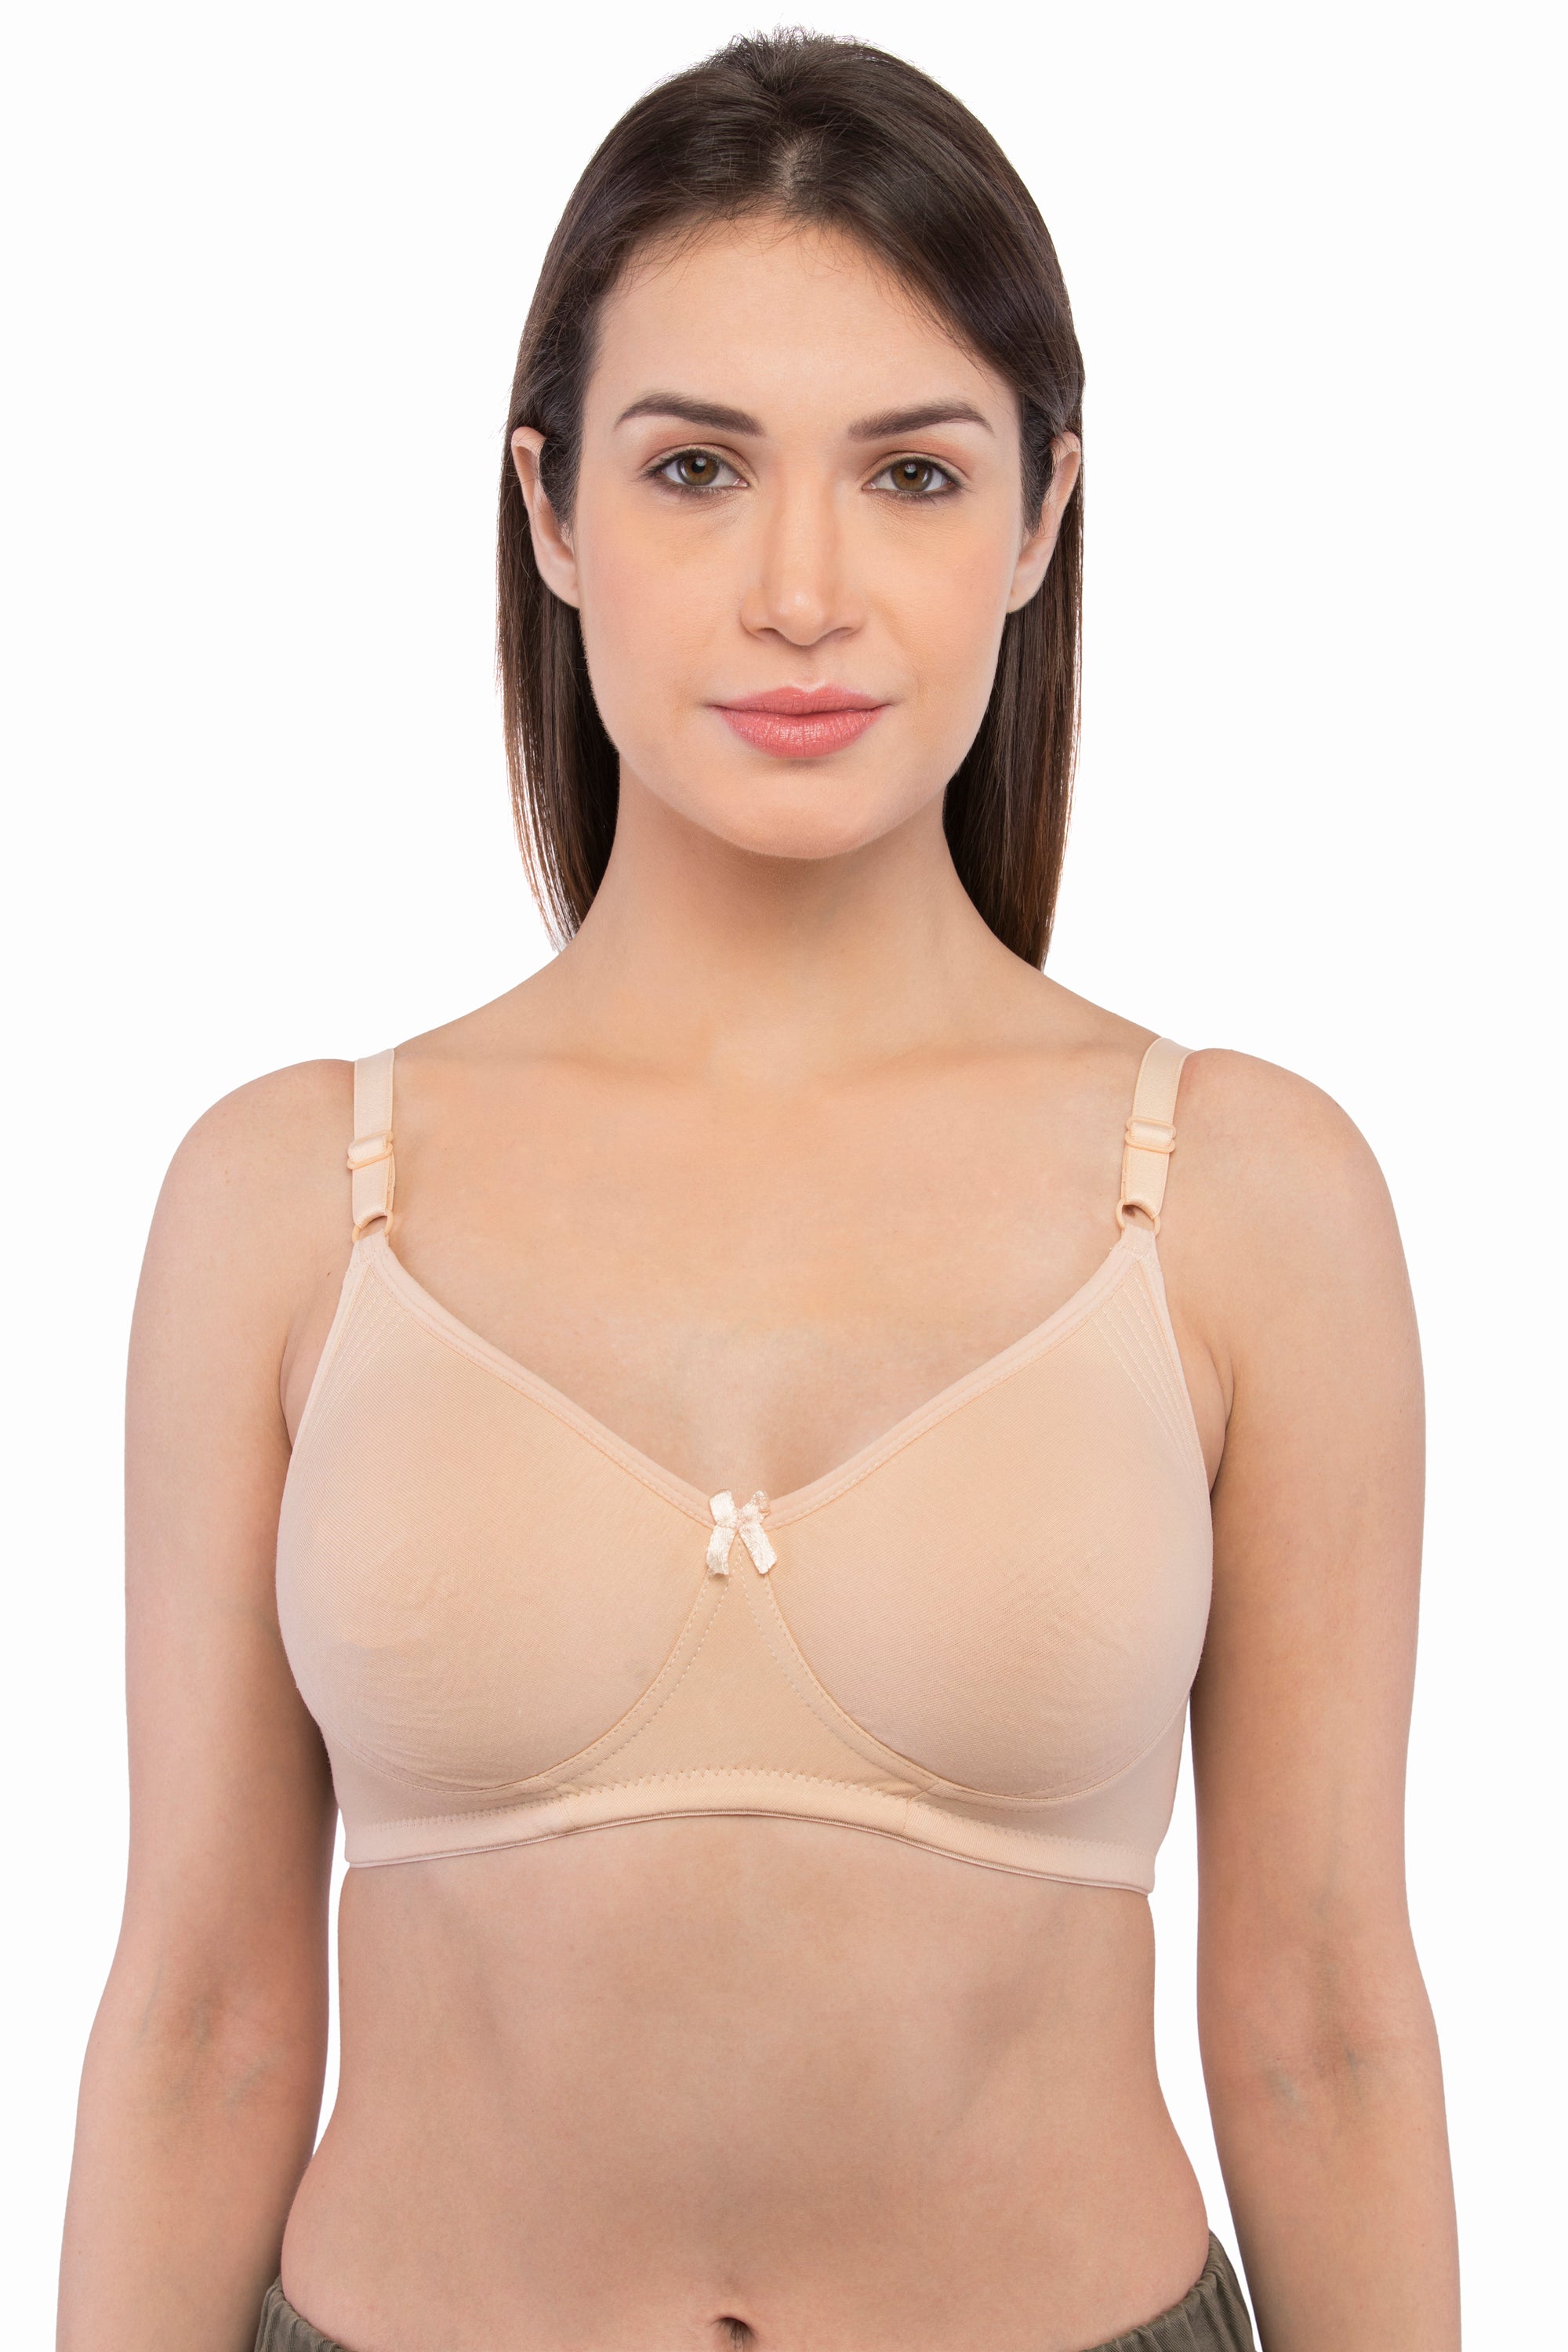 Buy Non-Padded & Non-Wired Cotton Bra Online